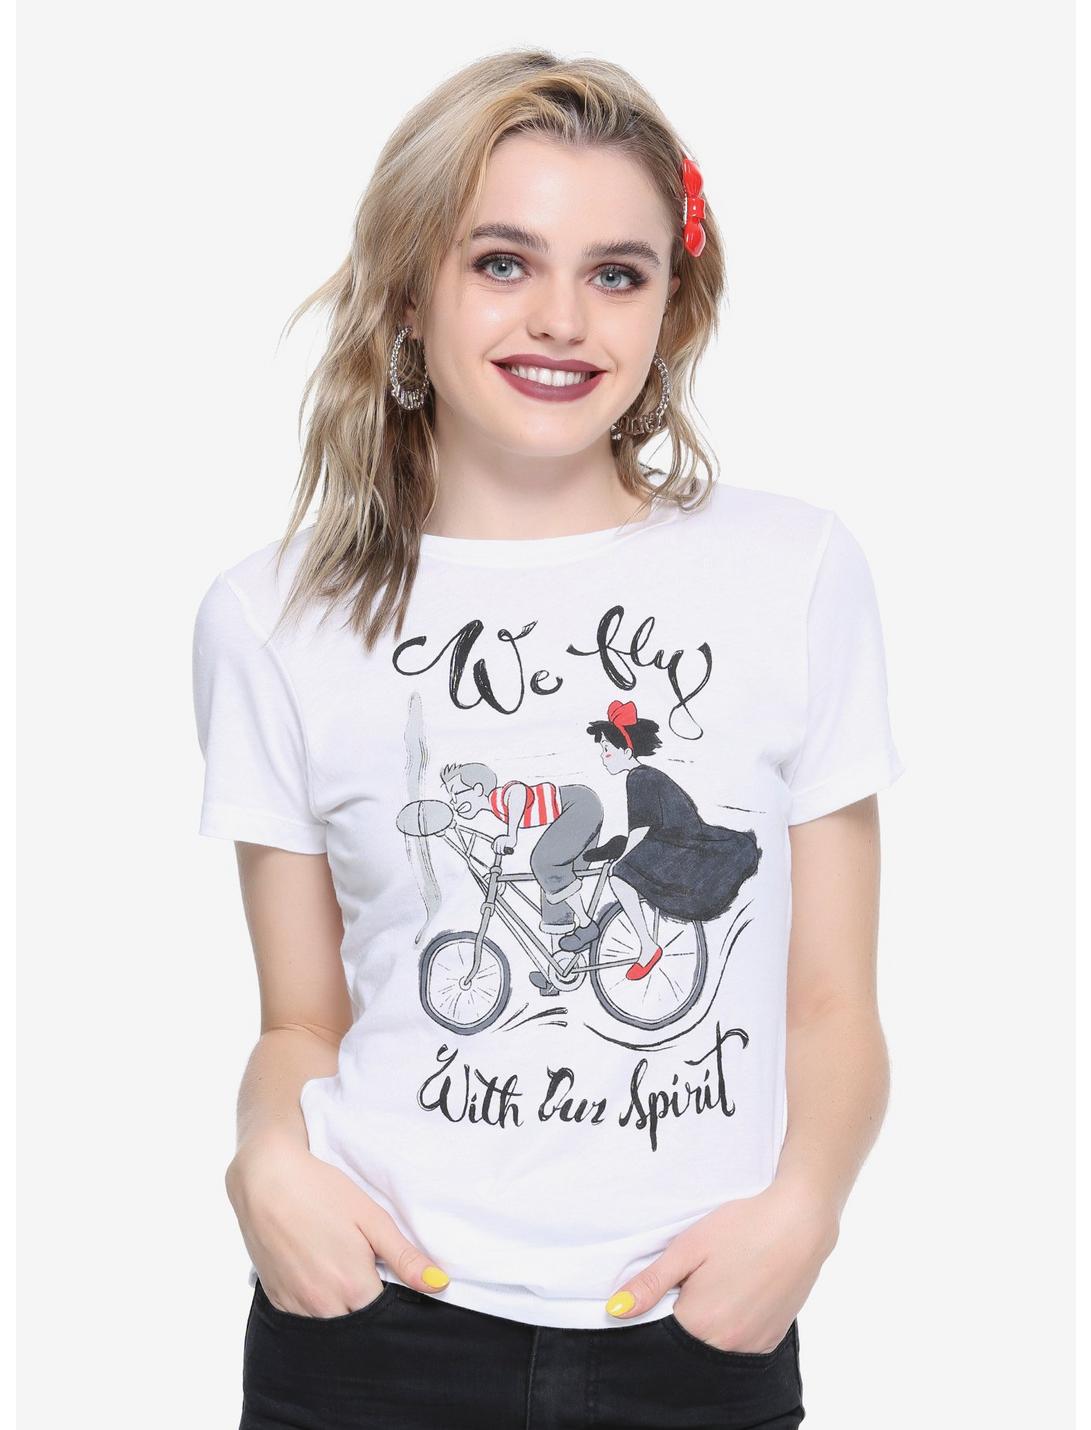 Her Universe Studio Ghibli Kiki's Delivery Service Fly With Our Spirit Girls T-Shirt, MULTICOLOR, hi-res